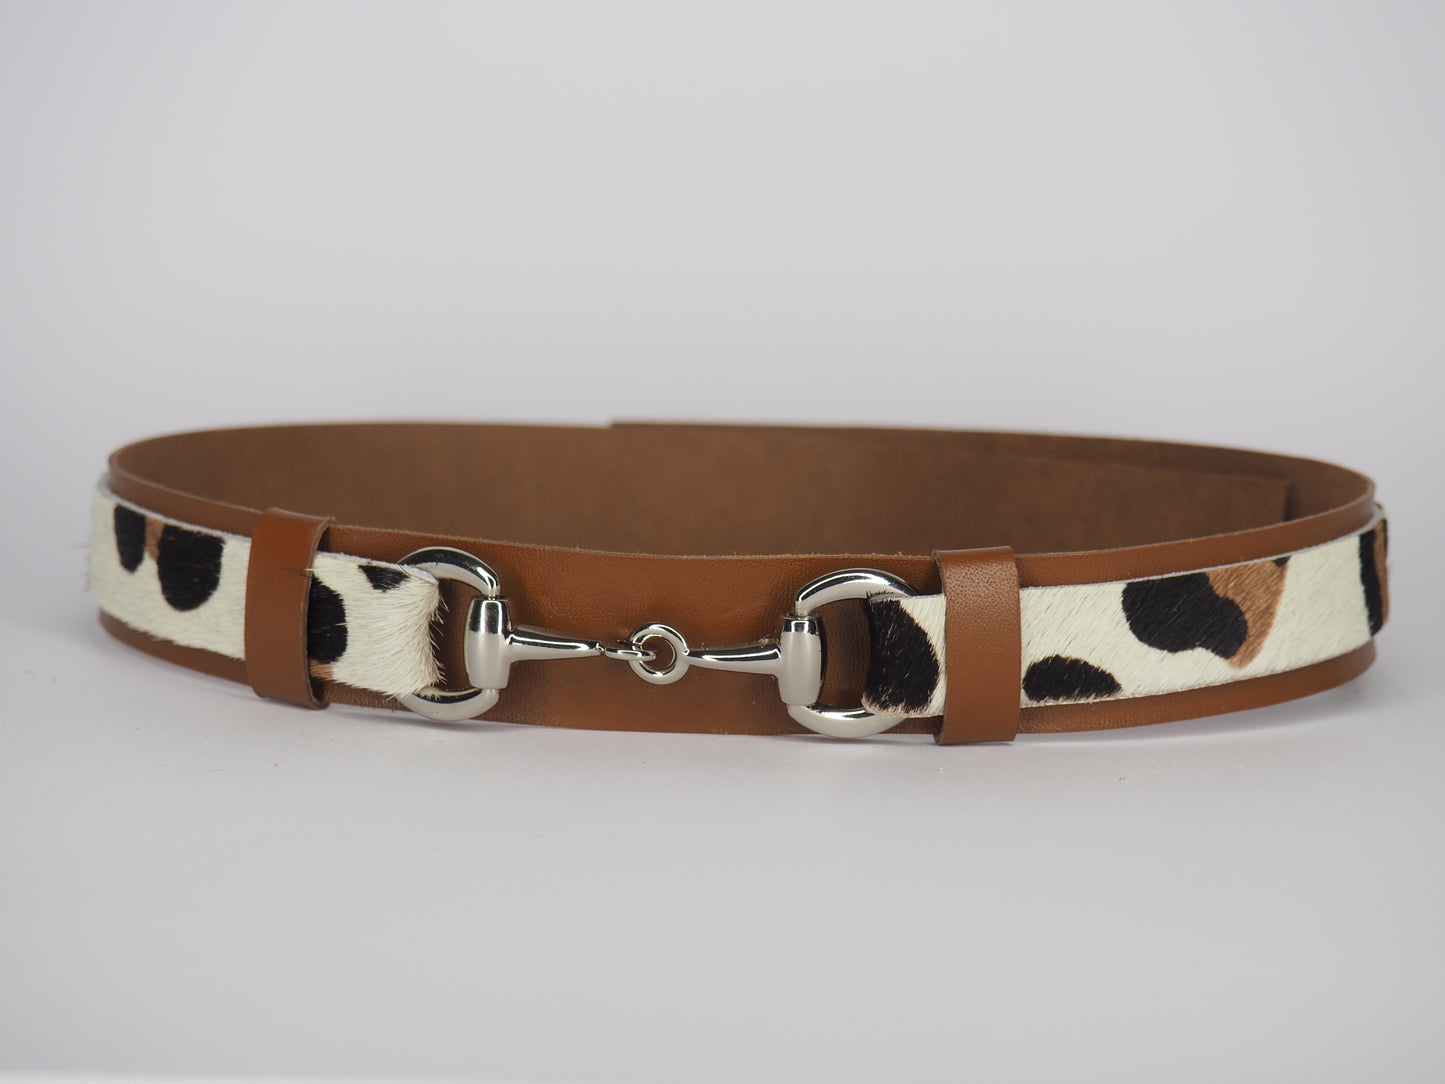 Adjustable Tan Leather Hat Band -Snow Leopard Print with Silver Horse Bit Hardware